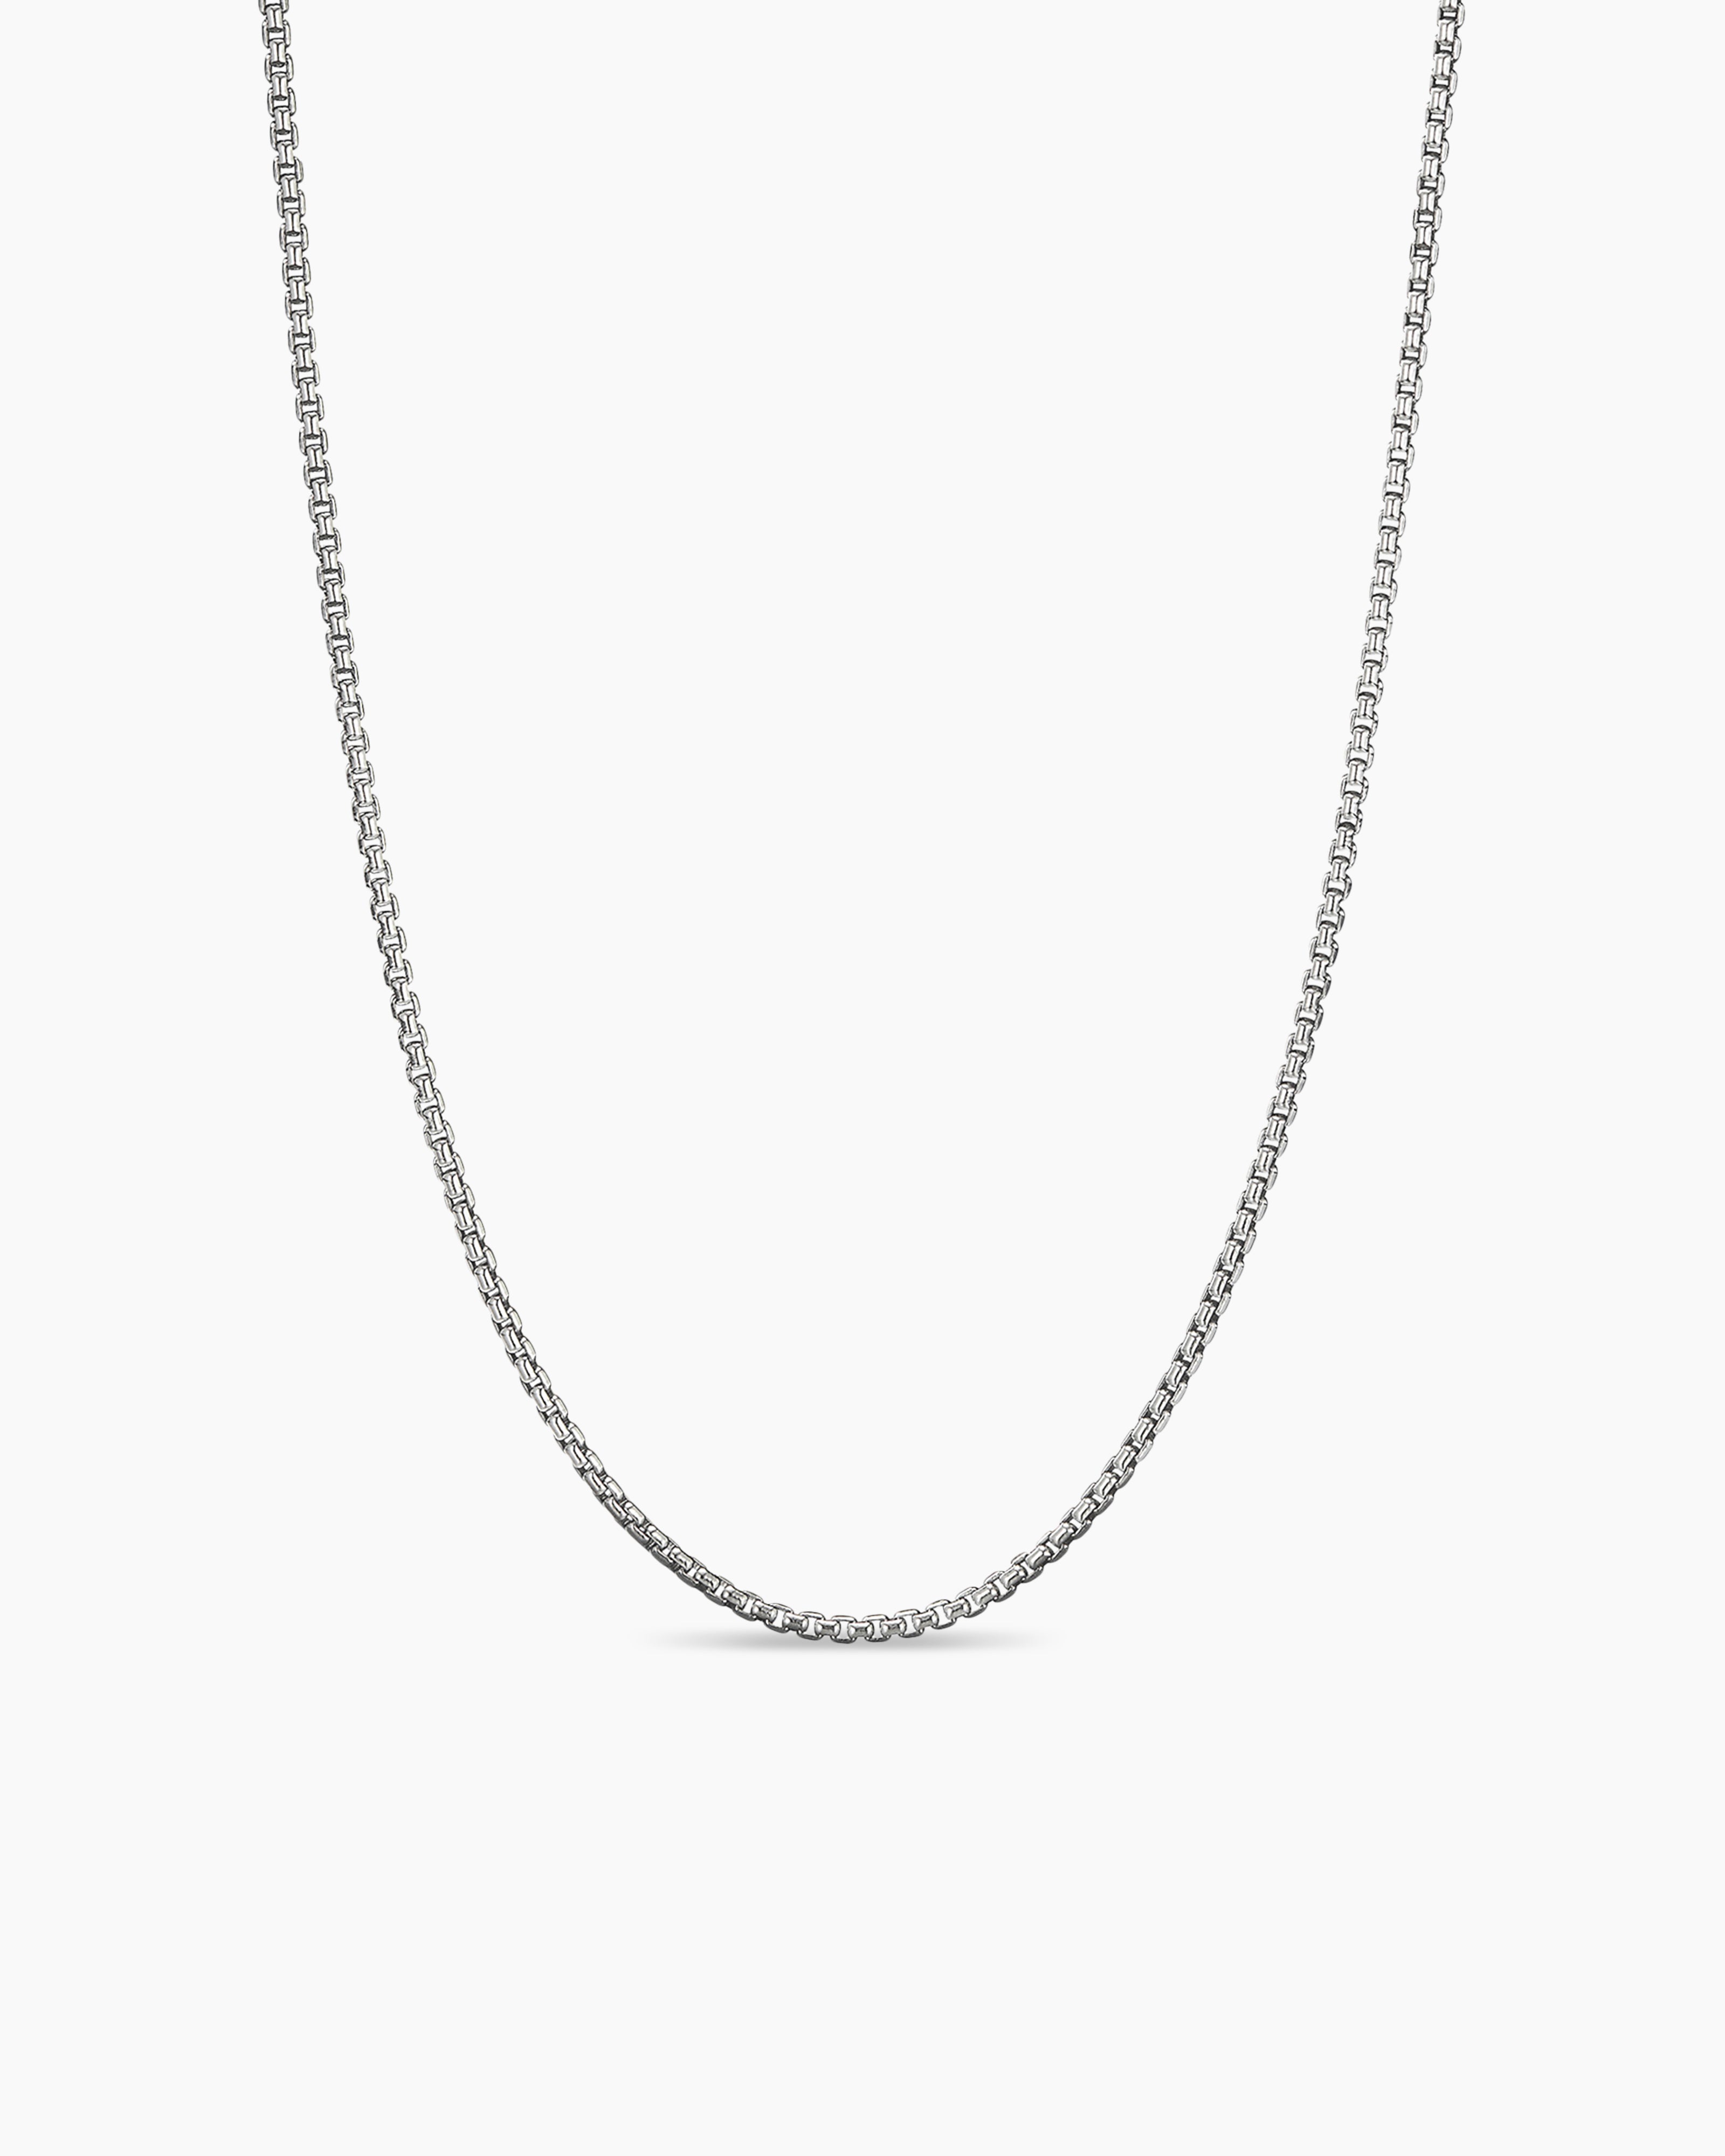 David Yurman DY Madison® Pearl Multi Row Chain Necklace in Sterling Silver  with Pearls | Nordstrom